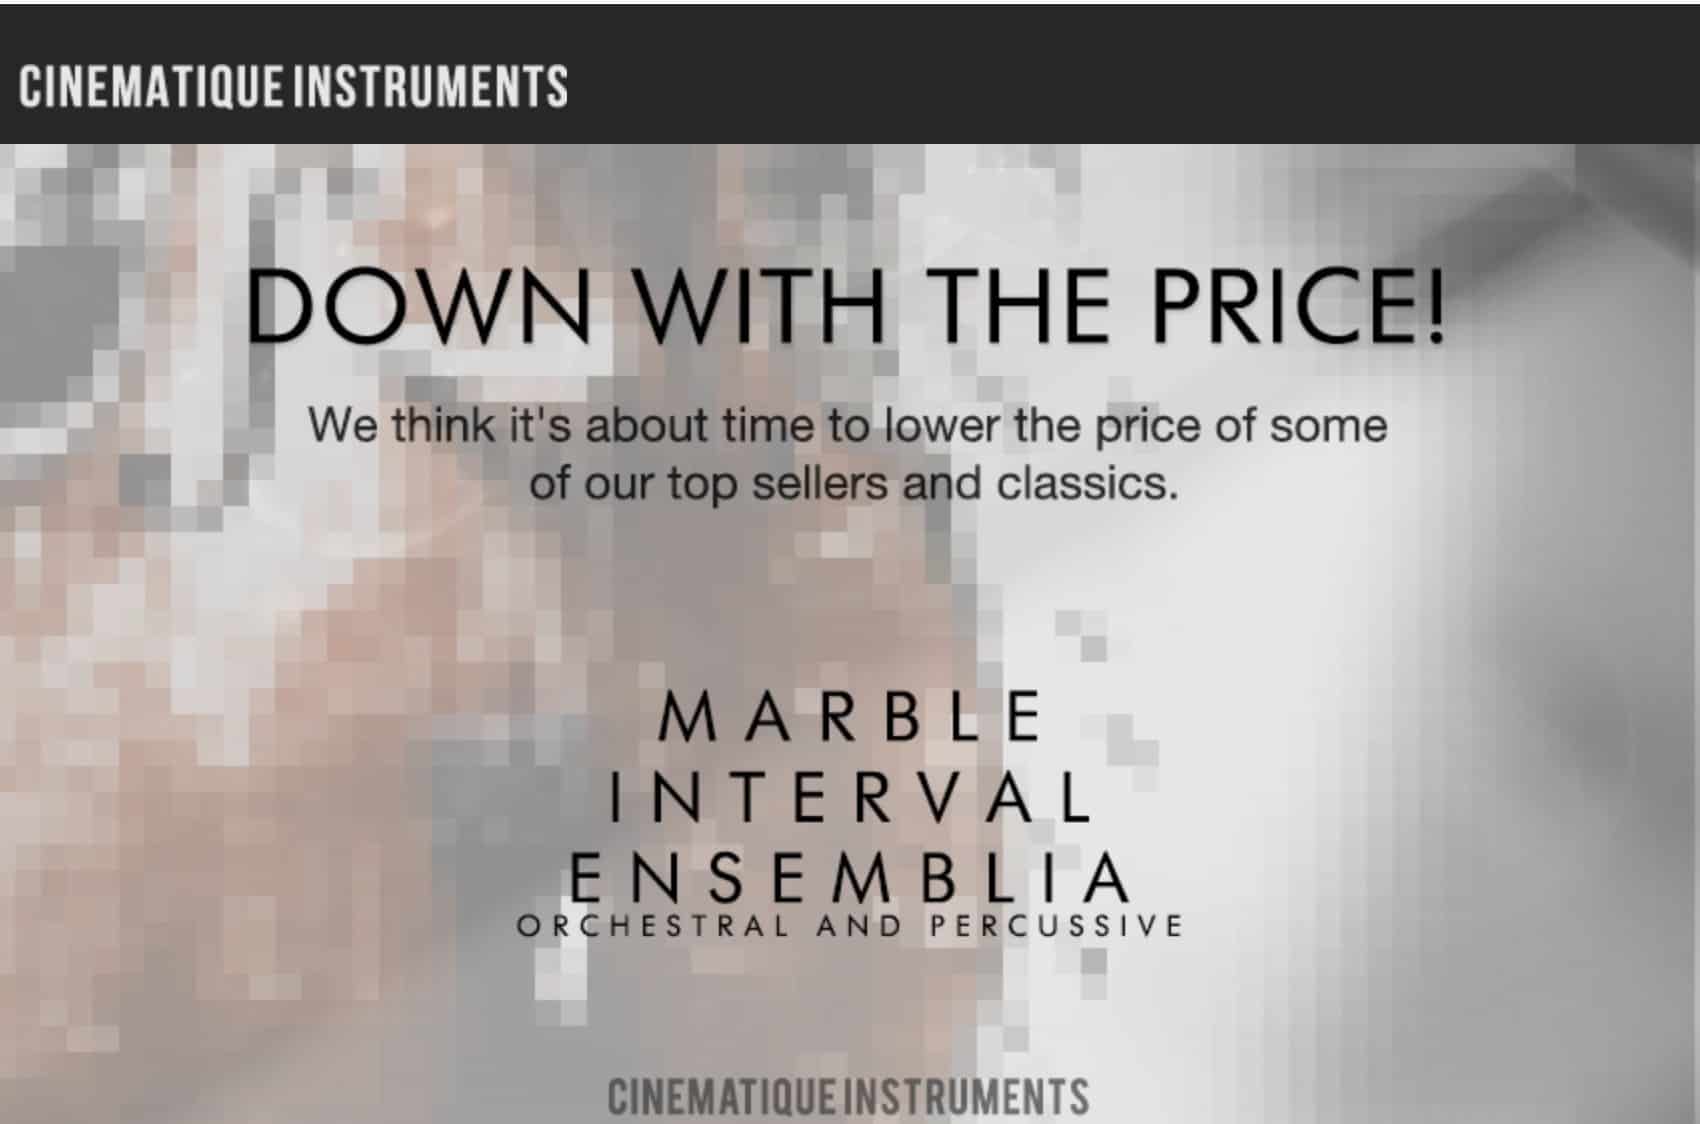 Cinematique-Instruments-News-Down-With-The-Price-3